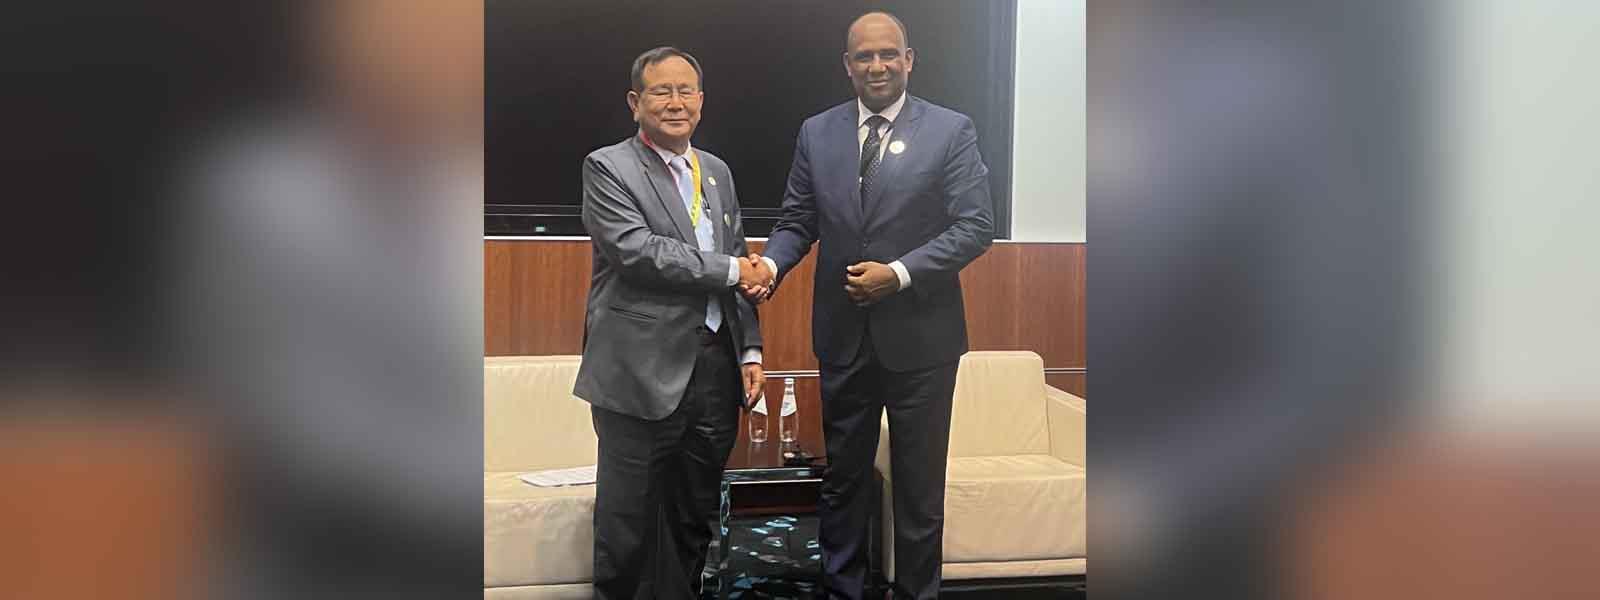 Minister of State for External Affairs, Dr. Rajkumar Ranjan Singh met H.E. Dr. Stergomena Lawrence, Foreign Minister of Tanzania on the sidelines of the 5th UN Conference on the Least Developed Countries in Doha